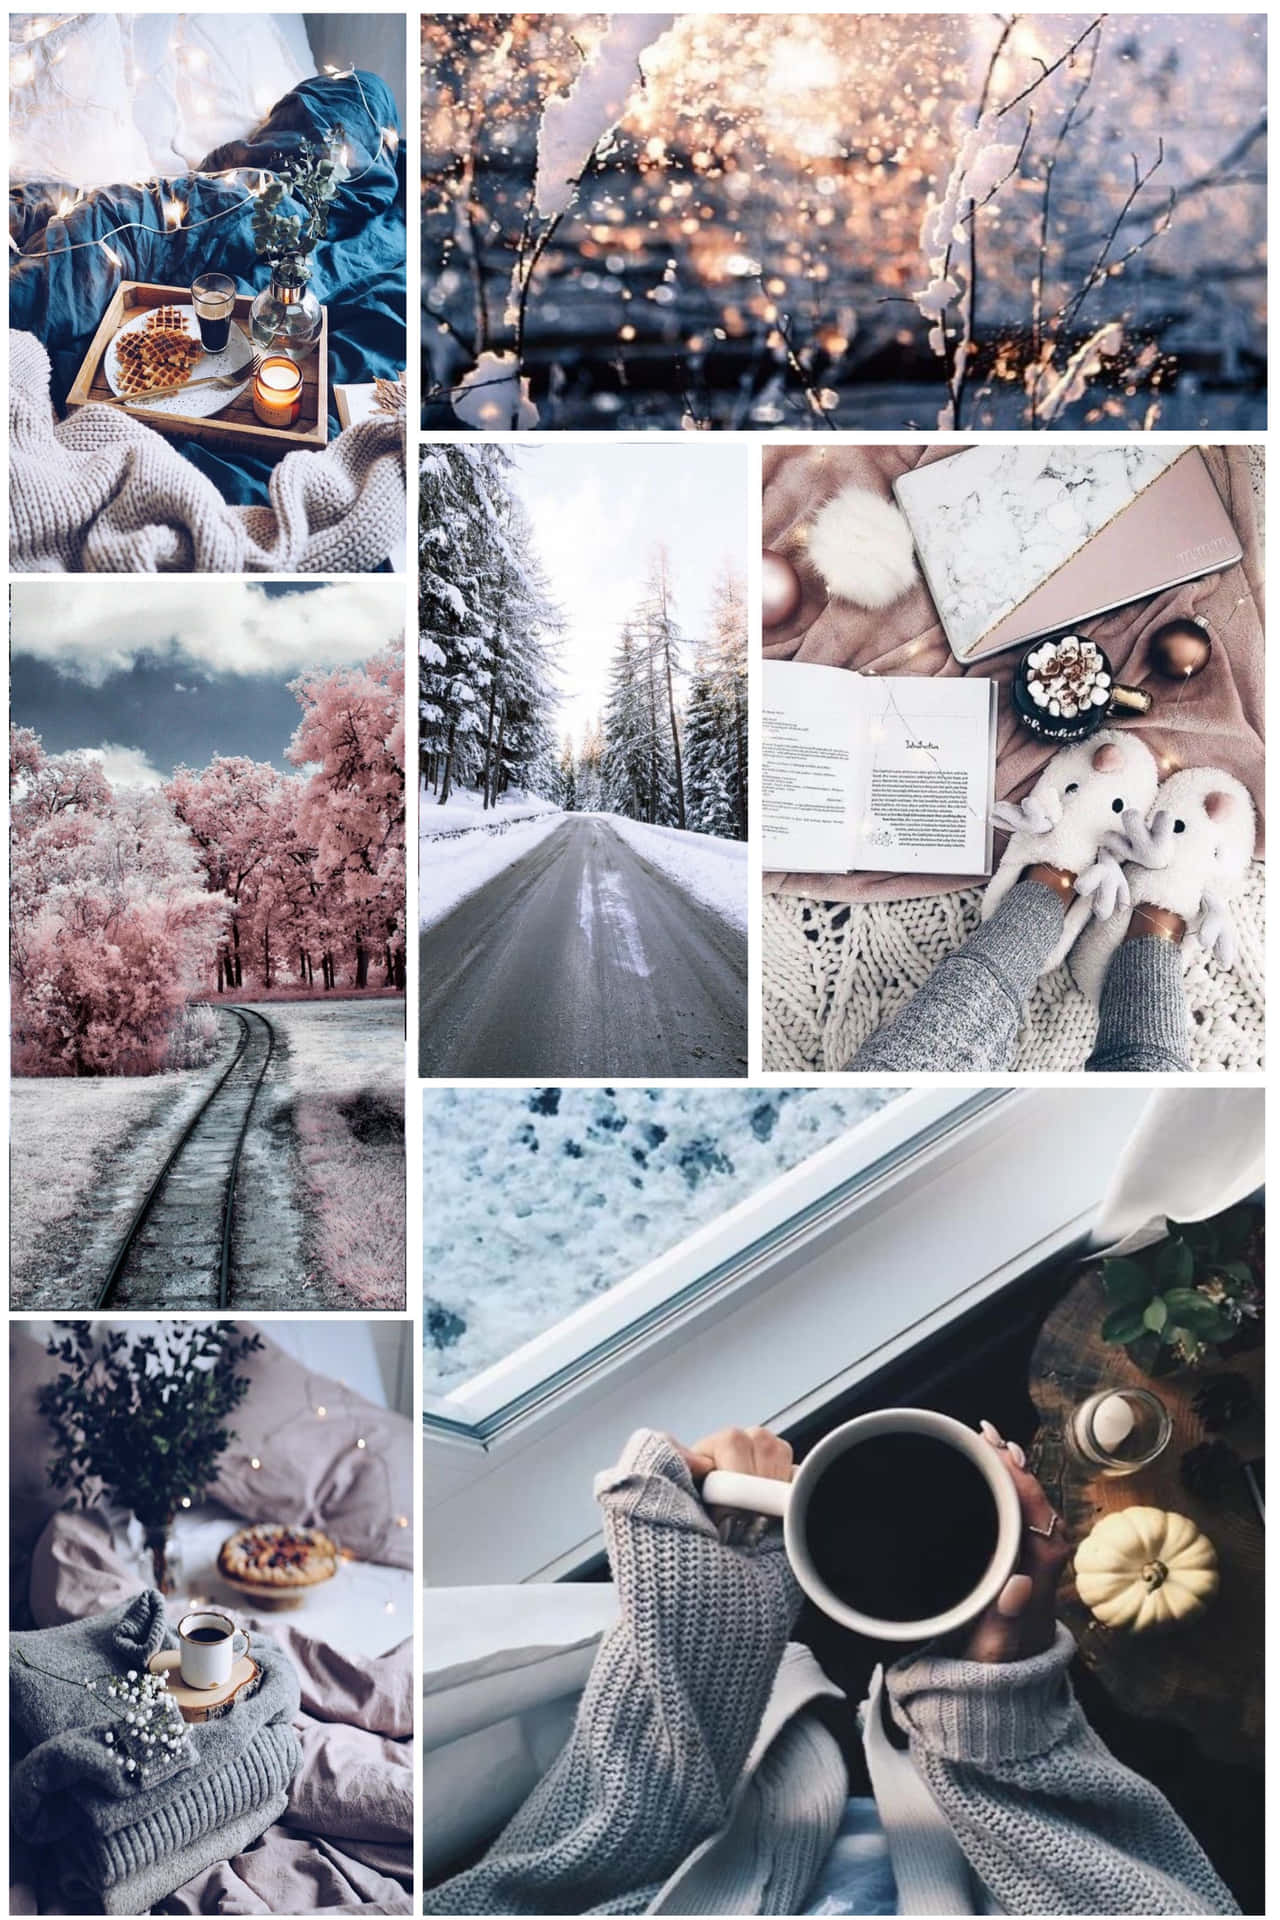 An ethereal winter wonderland in the form of a collage Wallpaper